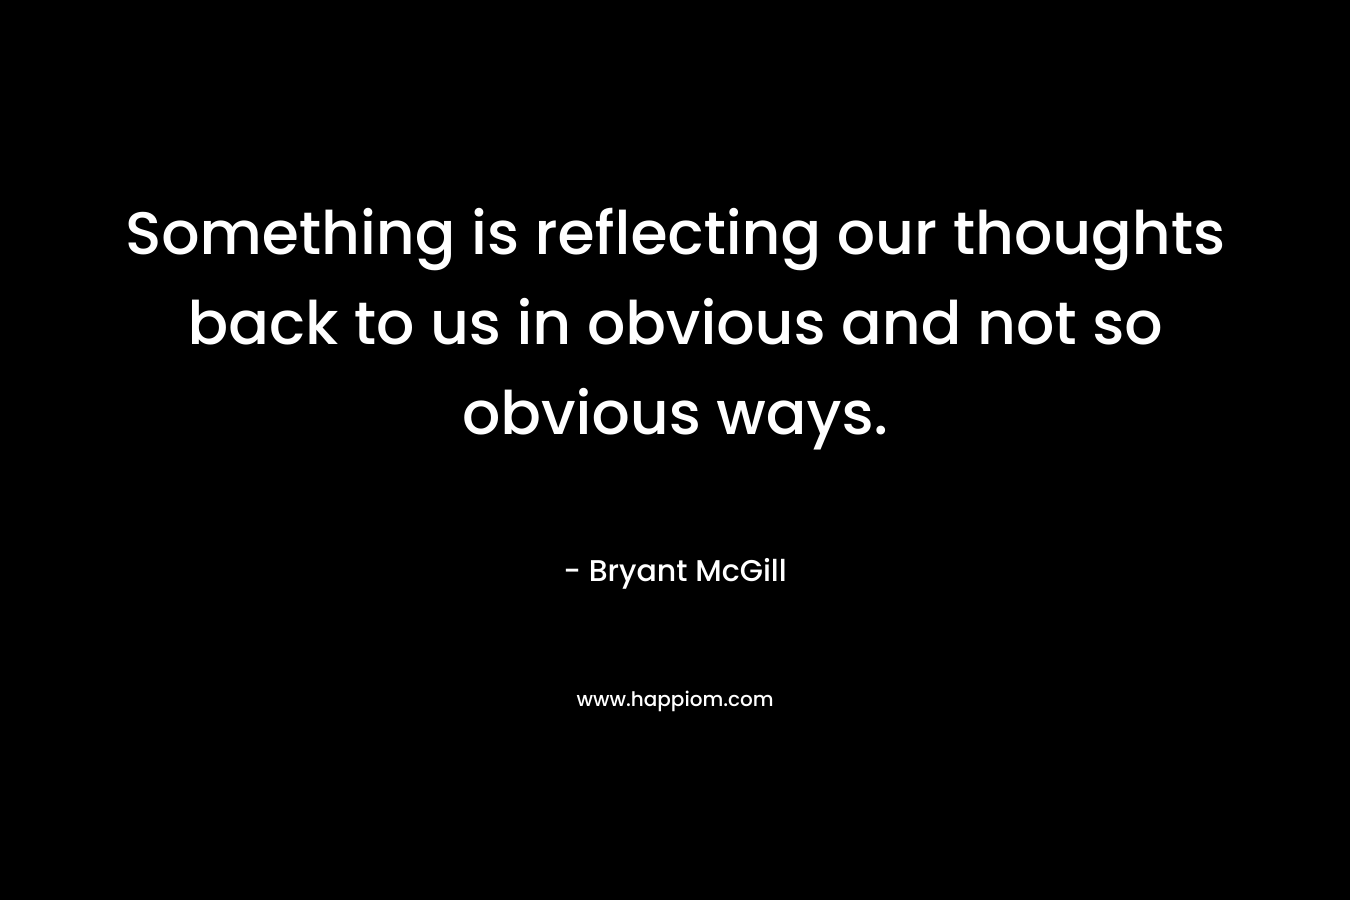 Something is reflecting our thoughts back to us in obvious and not so obvious ways.